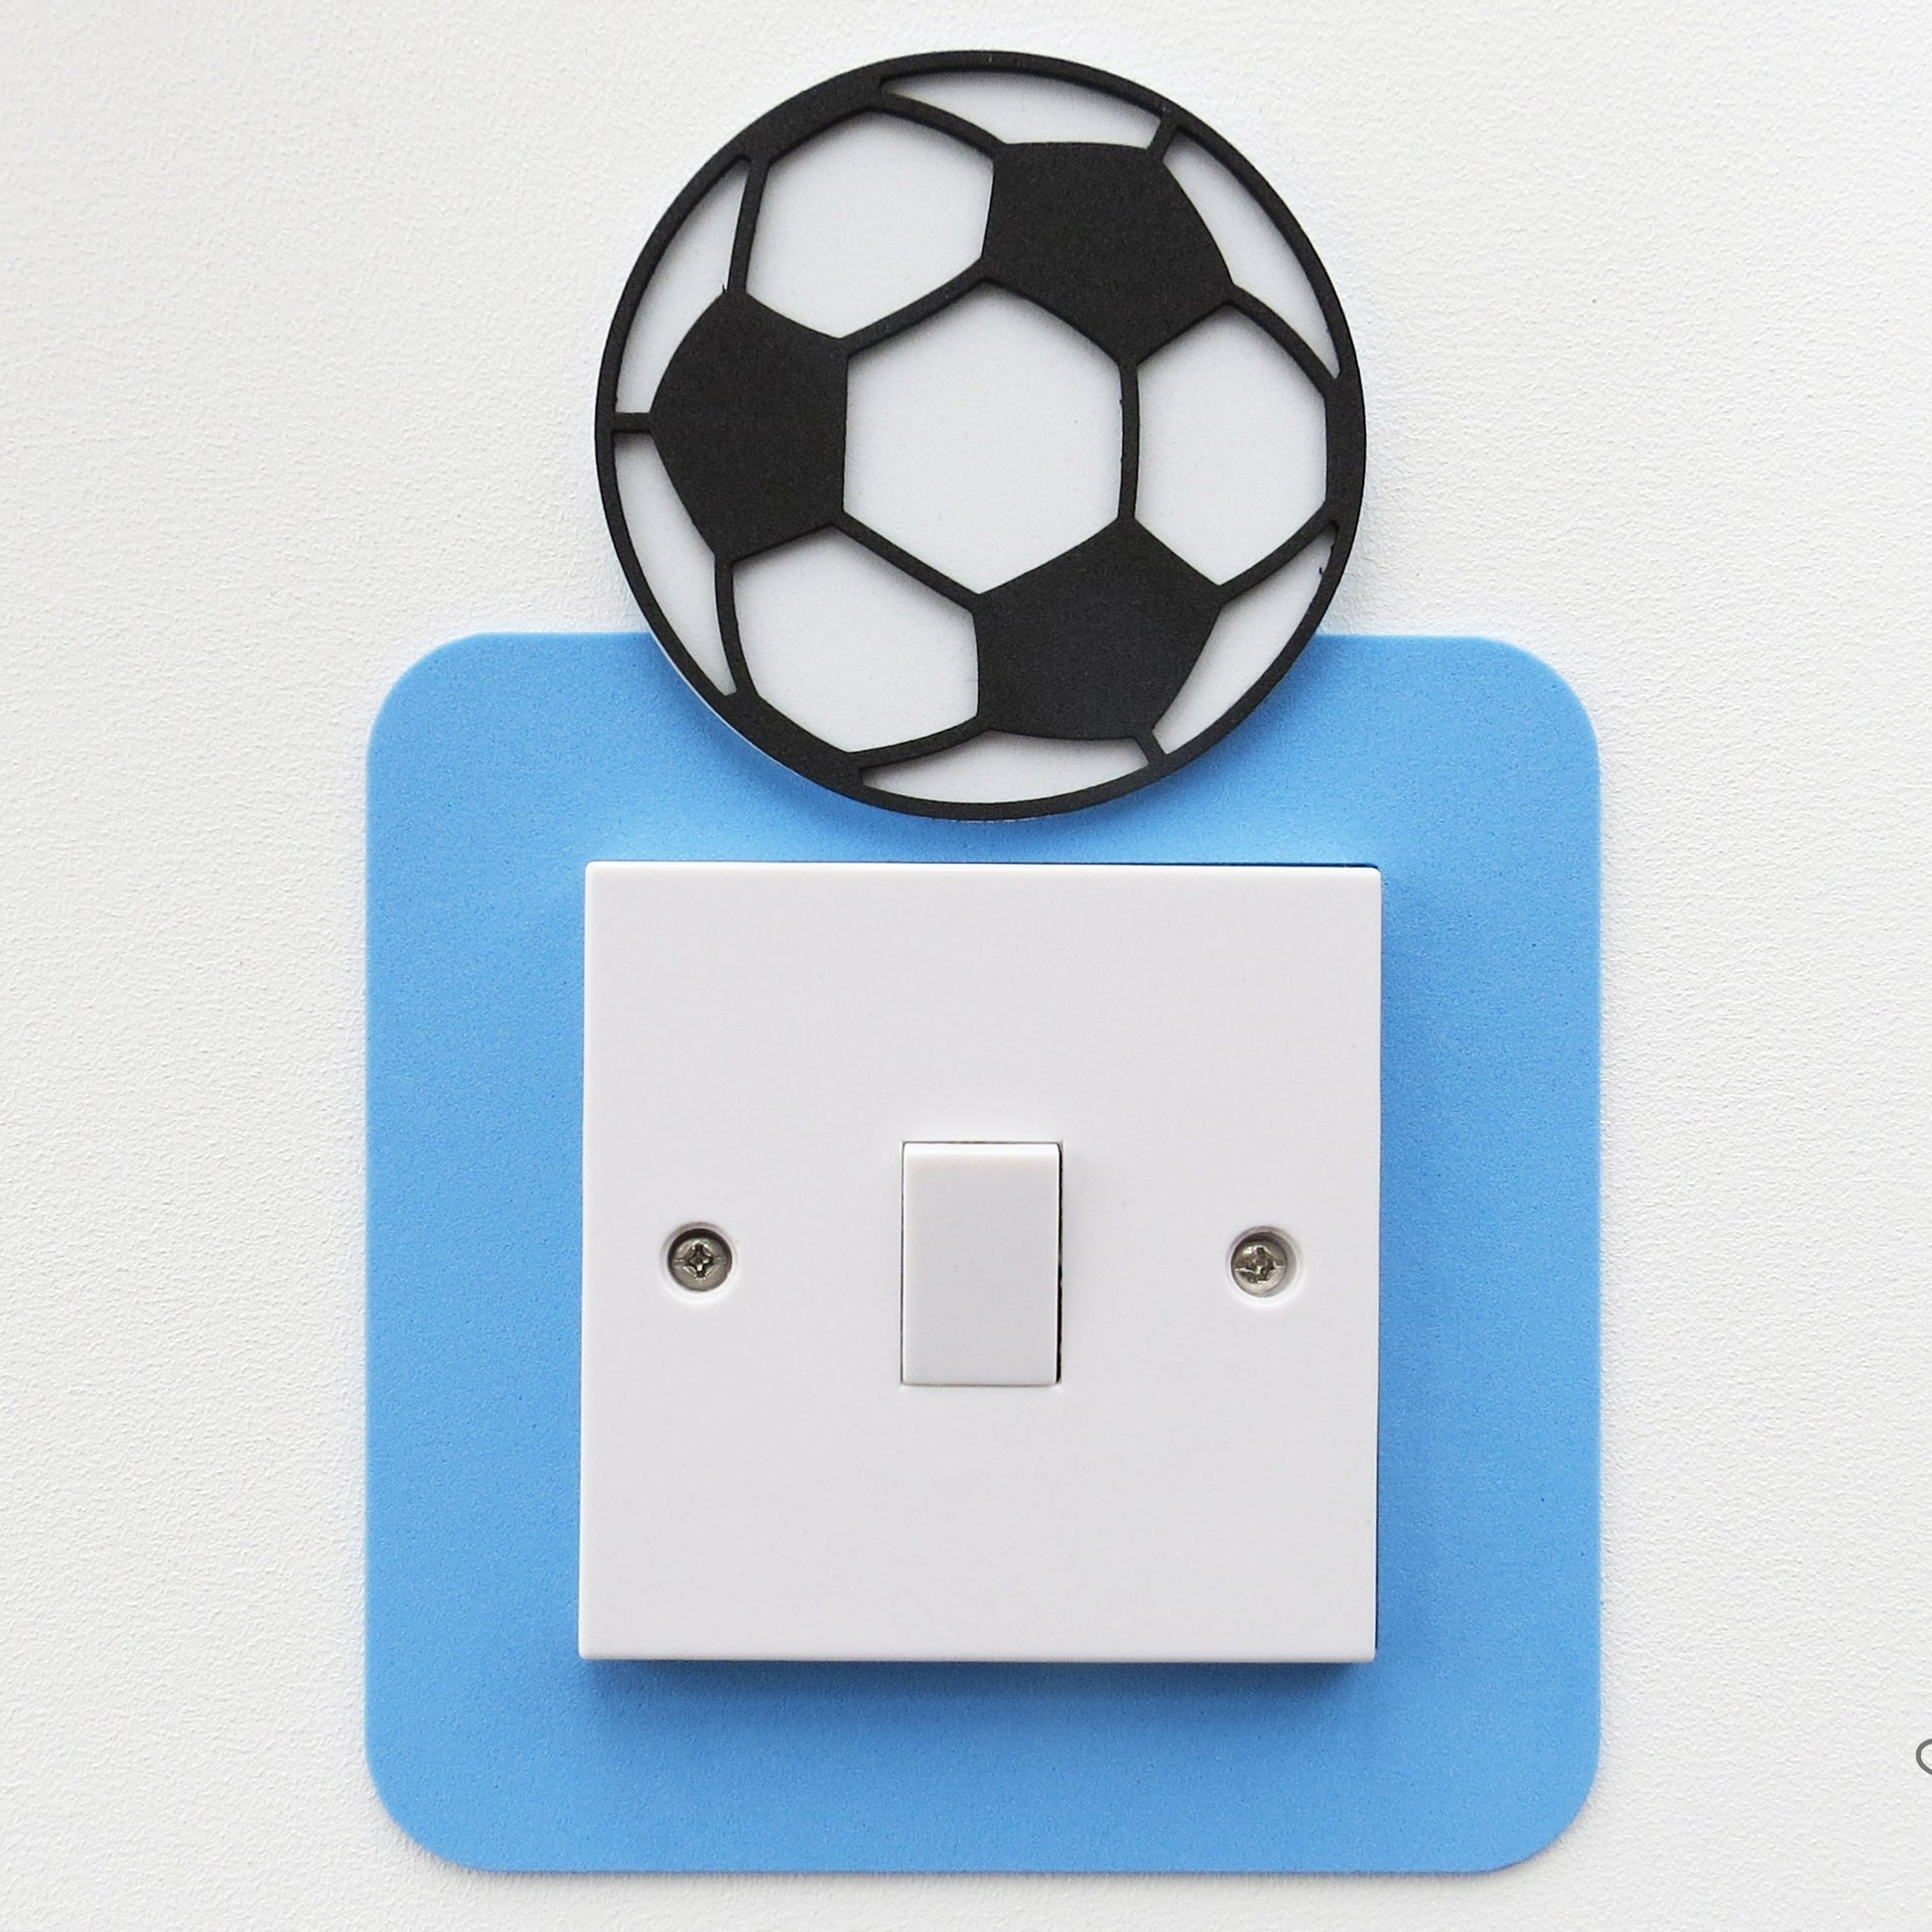 blue craft foam light switch surround designed with a black and white football